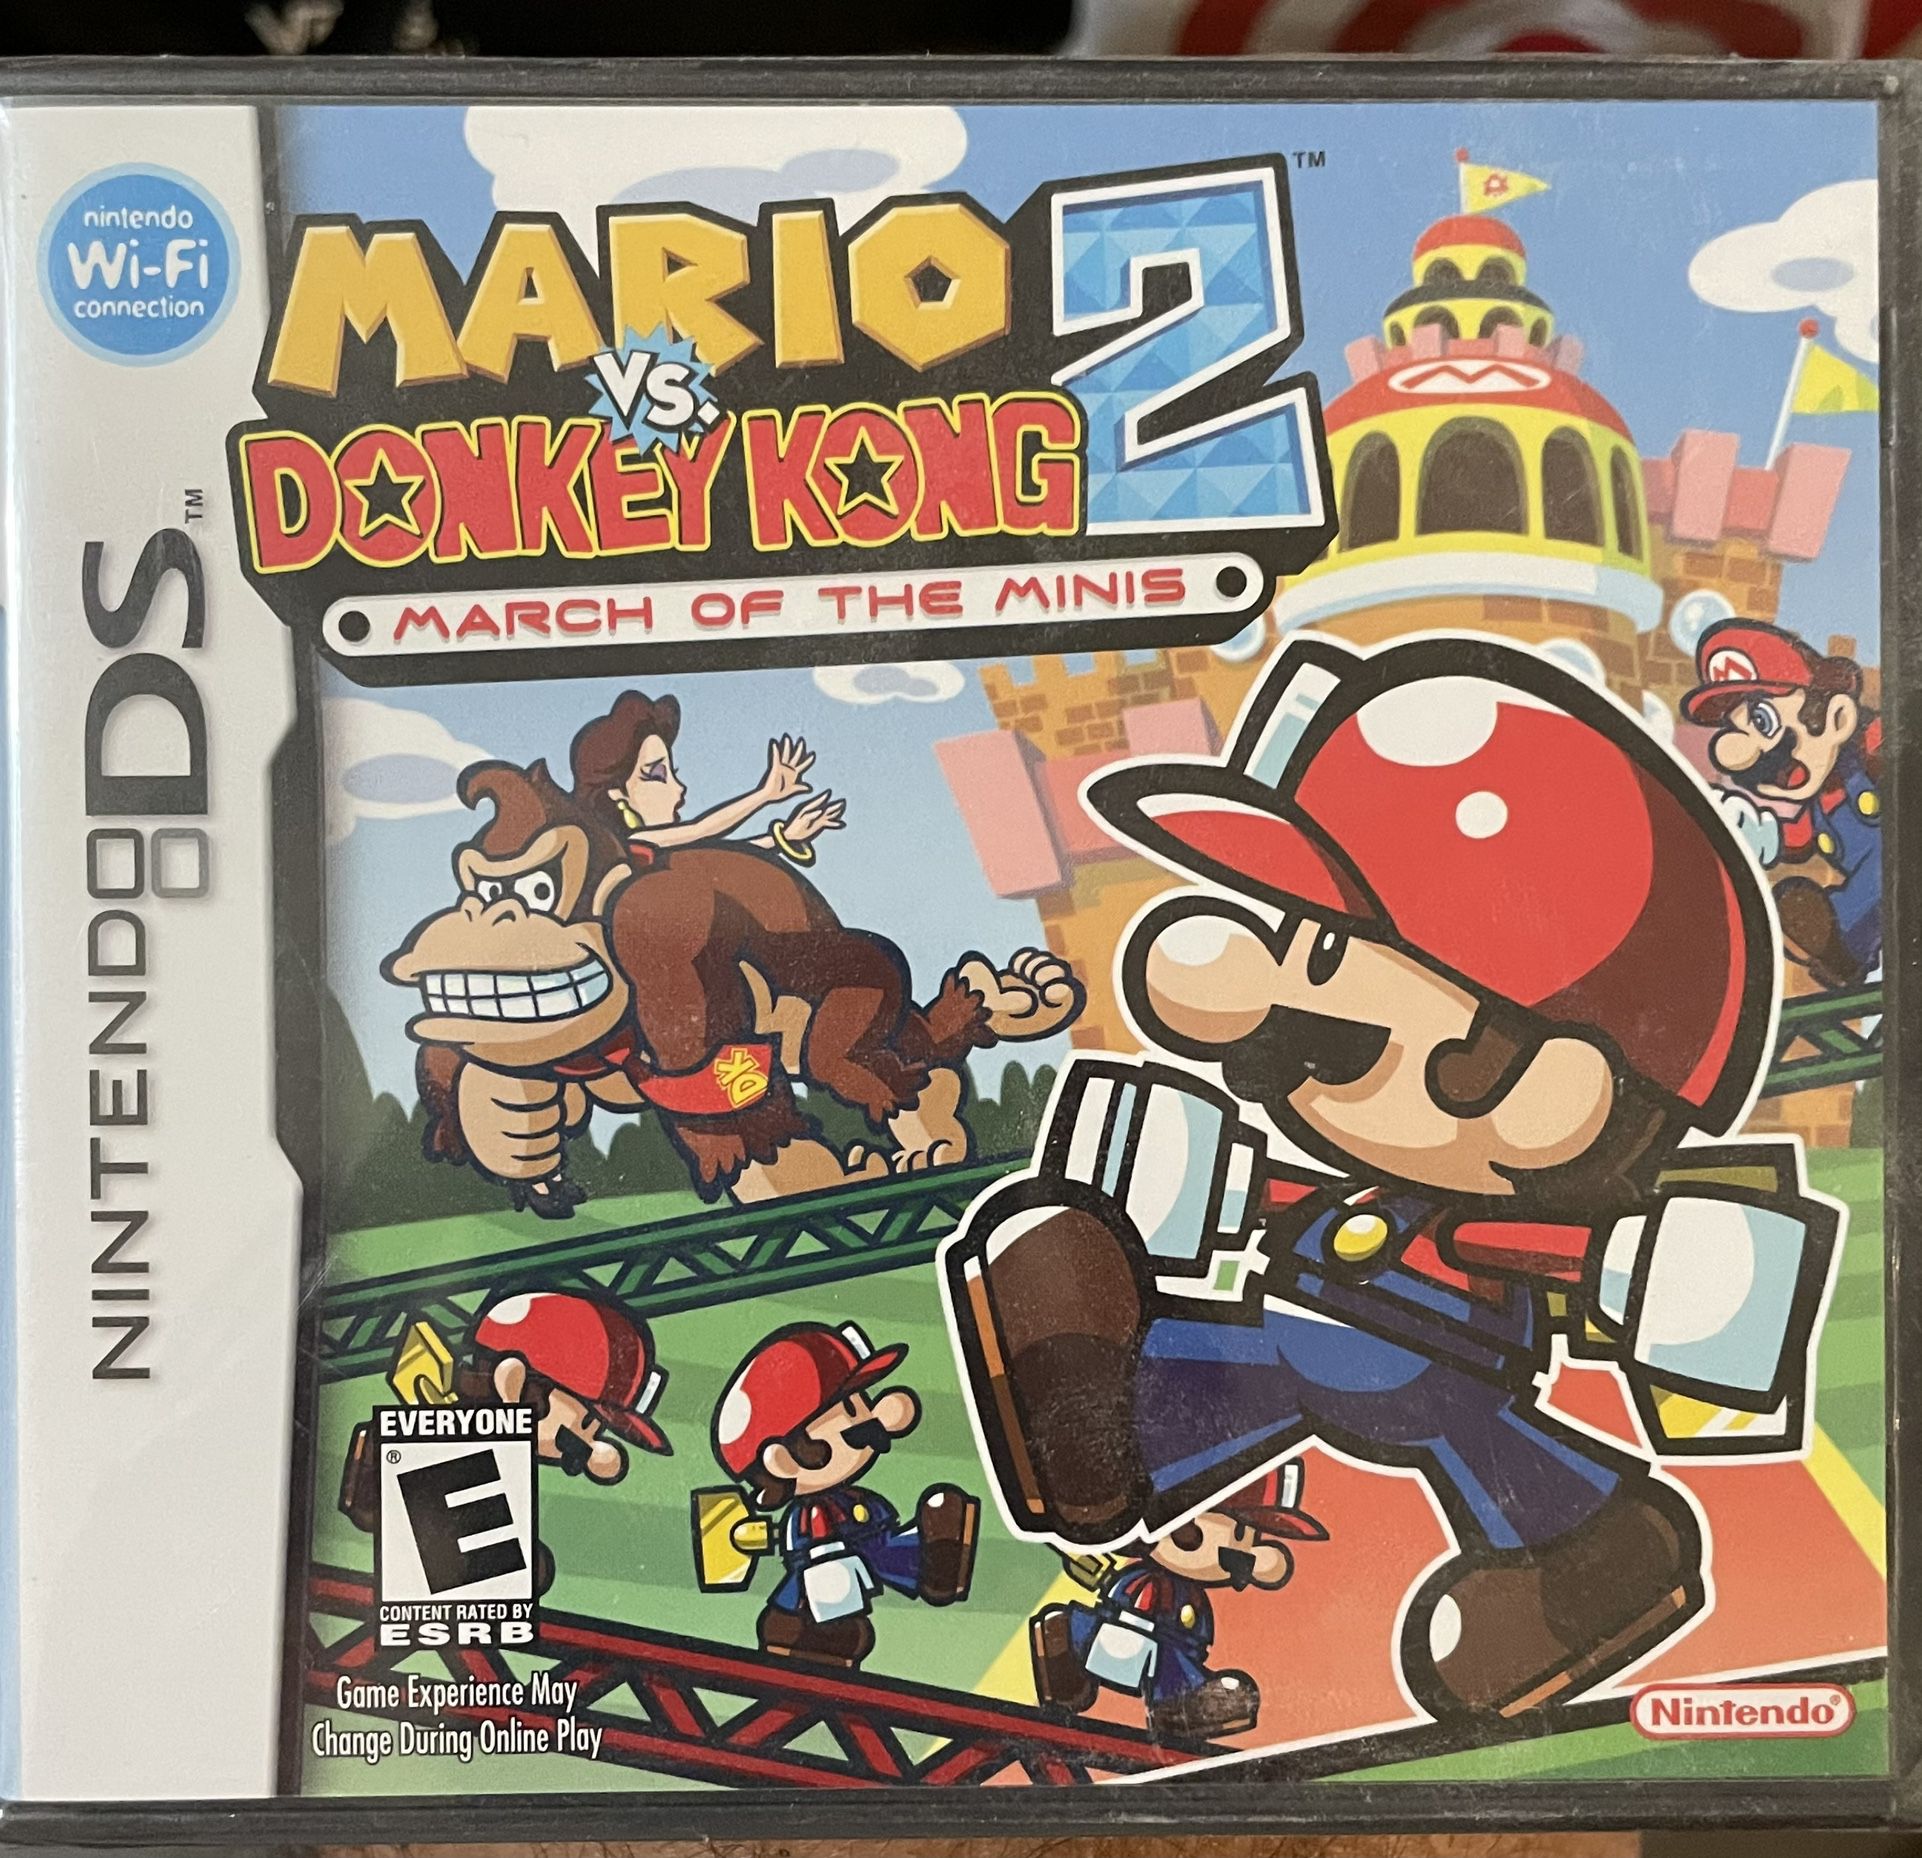 Nintendo DS. 2006 Mario Vs Donkey Kong2: March Of Minis. BRAND NEW FACTORY SEALED. $125.00 OBO